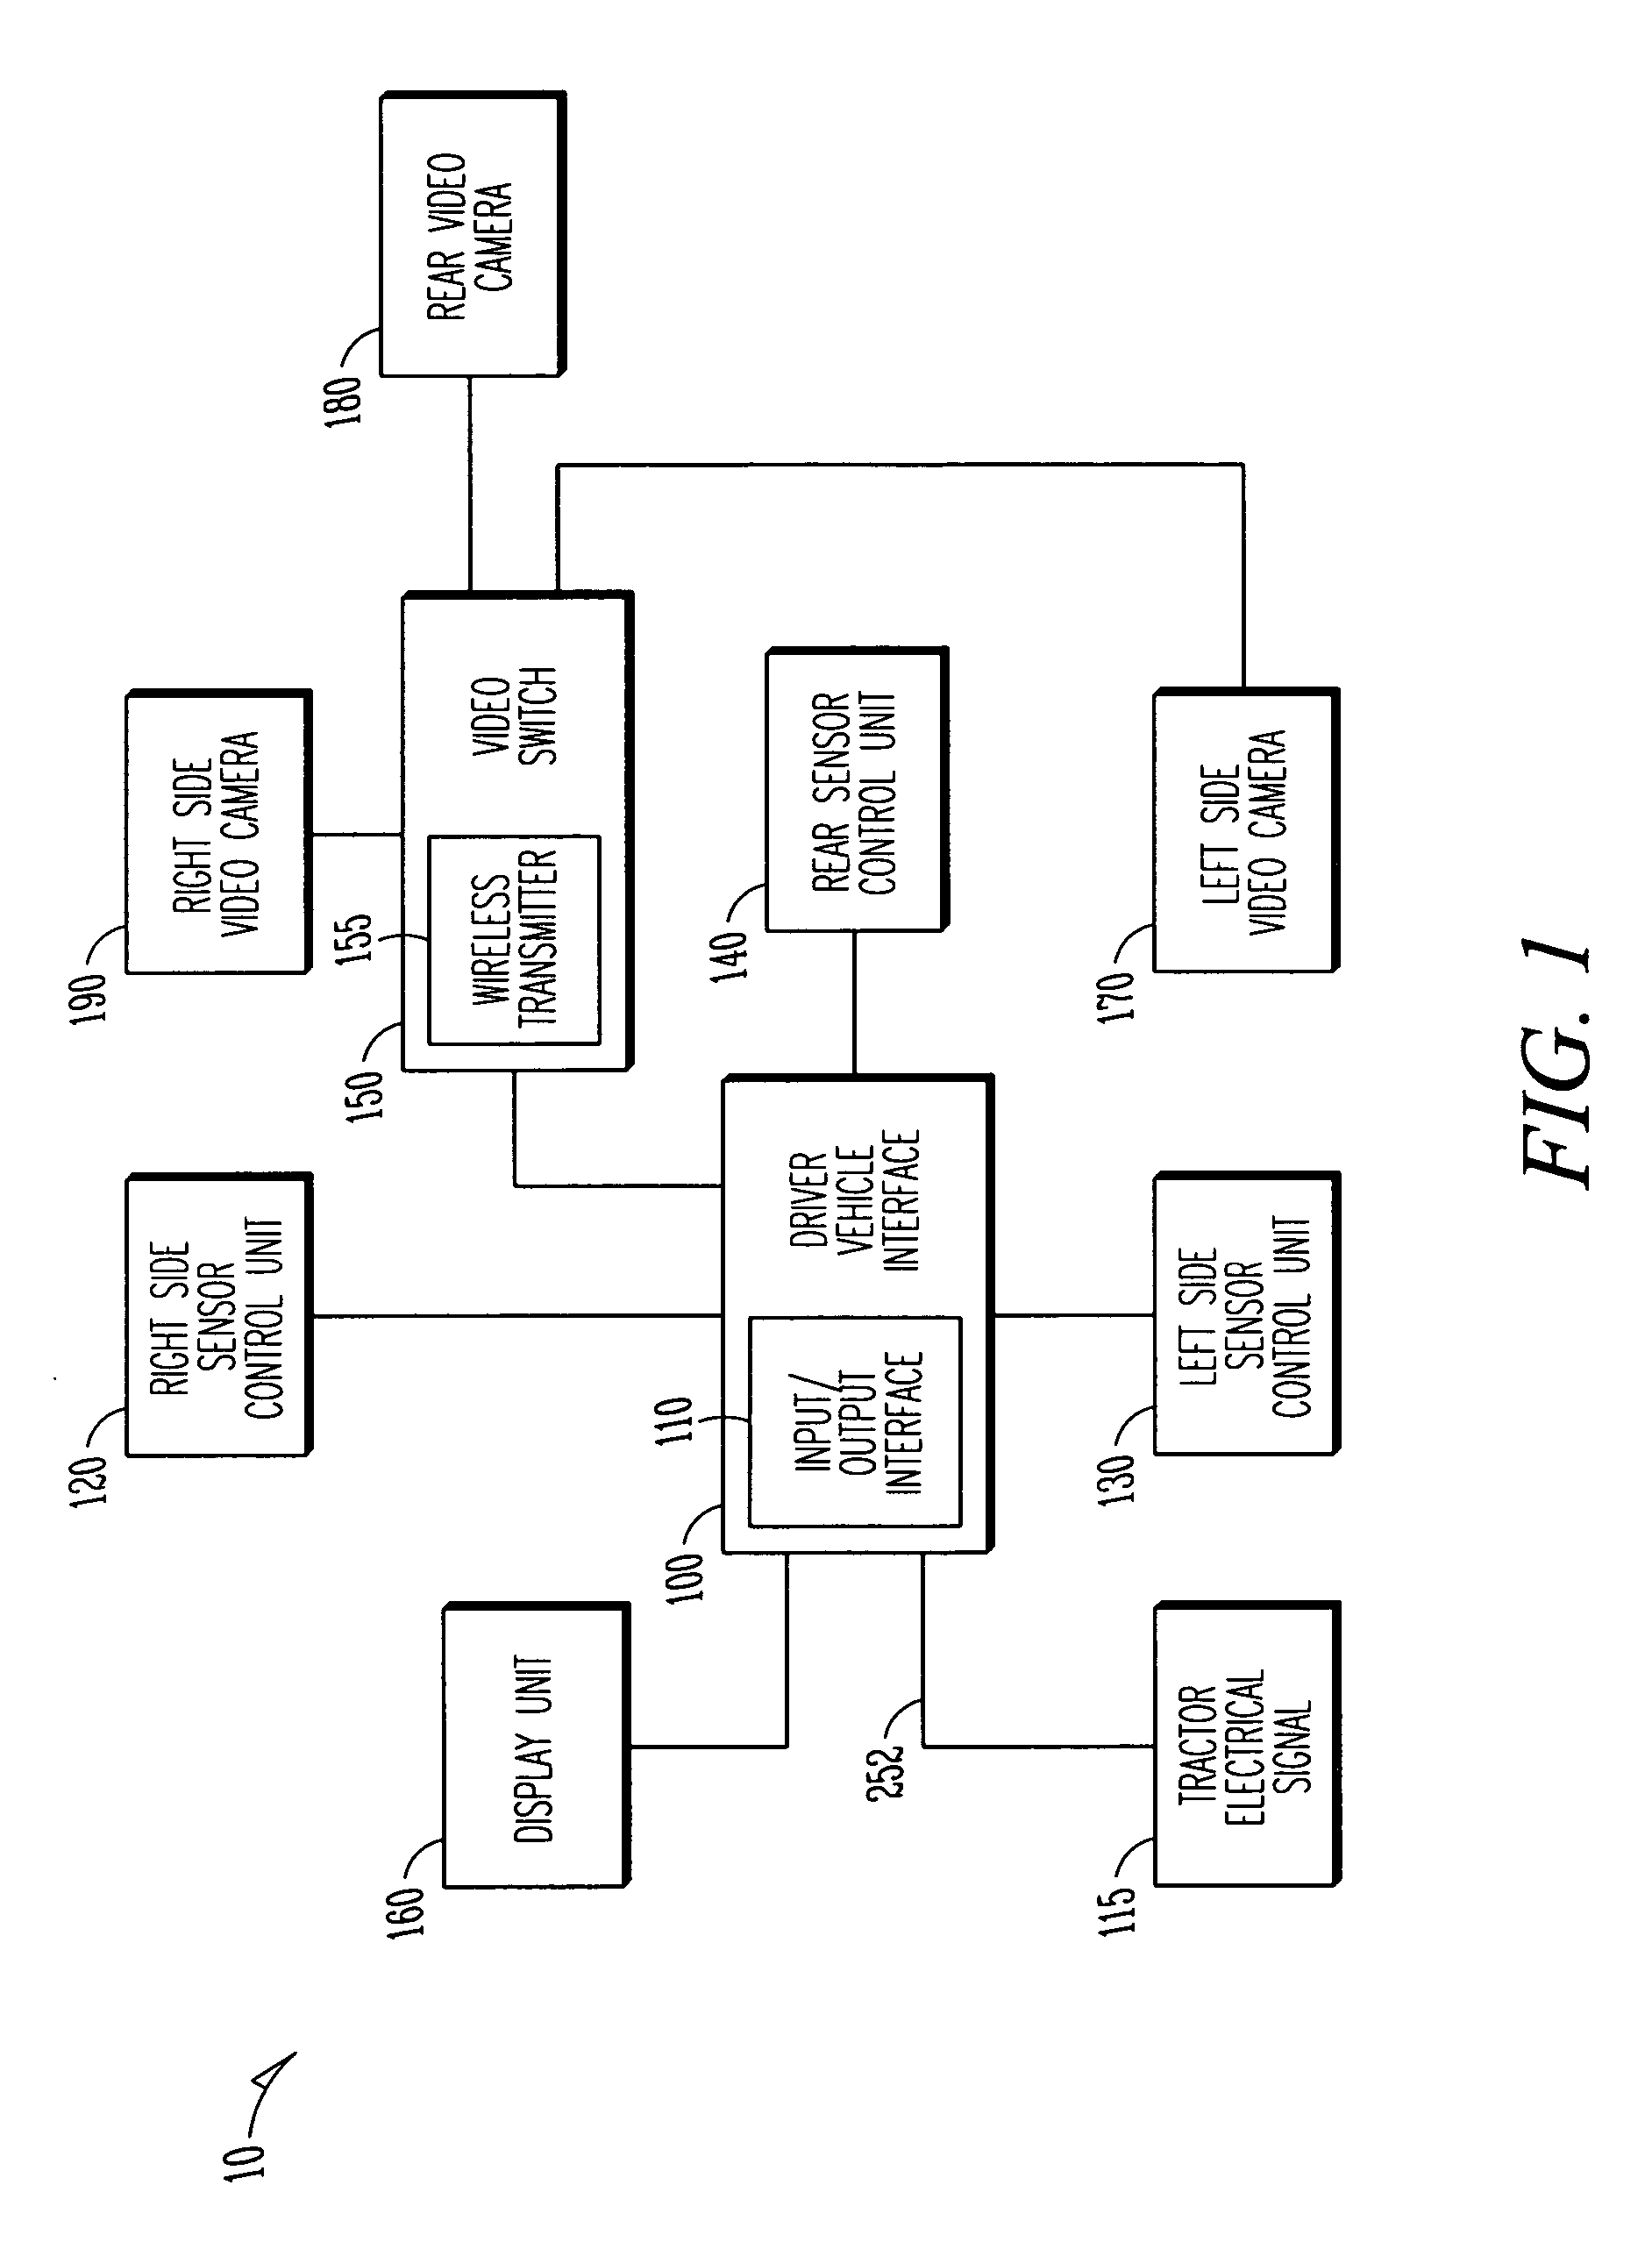 Trailer based collision warning system and method